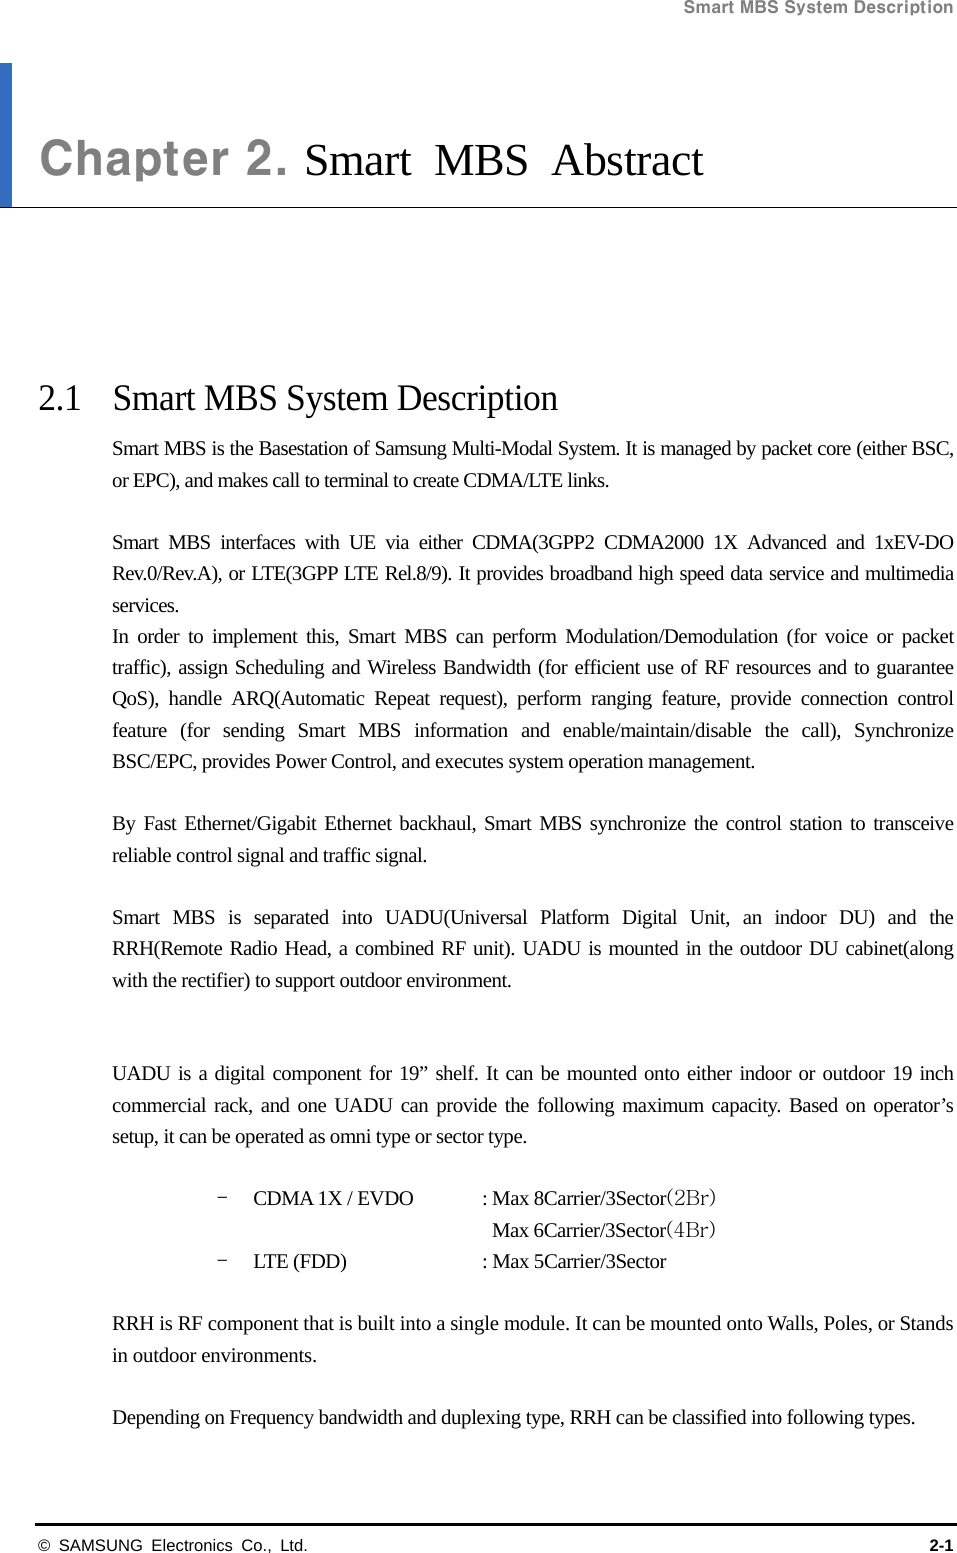 Smart MBS System Description   © SAMSUNG Electronics Co., Ltd.  2-1 Chapter 2. Smart MBS Abstract      2.1  Smart MBS System Description Smart MBS is the Basestation of Samsung Multi-Modal System. It is managed by packet core (either BSC, or EPC), and makes call to terminal to create CDMA/LTE links.  Smart MBS interfaces with UE via either CDMA(3GPP2 CDMA2000 1X Advanced and 1xEV-DO Rev.0/Rev.A), or LTE(3GPP LTE Rel.8/9). It provides broadband high speed data service and multimedia services.  In order to implement this, Smart MBS can perform Modulation/Demodulation (for voice or packet traffic), assign Scheduling and Wireless Bandwidth (for efficient use of RF resources and to guarantee QoS), handle ARQ(Automatic Repeat request), perform ranging feature, provide connection control feature (for sending Smart MBS information and enable/maintain/disable the call), Synchronize BSC/EPC, provides Power Control, and executes system operation management.  By Fast Ethernet/Gigabit Ethernet backhaul, Smart MBS synchronize the control station to transceive reliable control signal and traffic signal.  Smart MBS is separated into UADU(Universal Platform Digital Unit, an indoor DU) and the RRH(Remote Radio Head, a combined RF unit). UADU is mounted in the outdoor DU cabinet(along with the rectifier) to support outdoor environment.   UADU is a digital component for 19” shelf. It can be mounted onto either indoor or outdoor 19 inch commercial rack, and one UADU can provide the following maximum capacity. Based on operator’s setup, it can be operated as omni type or sector type.  - CDMA 1X / EVDO  : Max 8Carrier/3Sector(2Br) Max 6Carrier/3Sector(4Br) - LTE (FDD)    : Max 5Carrier/3Sector  RRH is RF component that is built into a single module. It can be mounted onto Walls, Poles, or Stands in outdoor environments.  Depending on Frequency bandwidth and duplexing type, RRH can be classified into following types.  